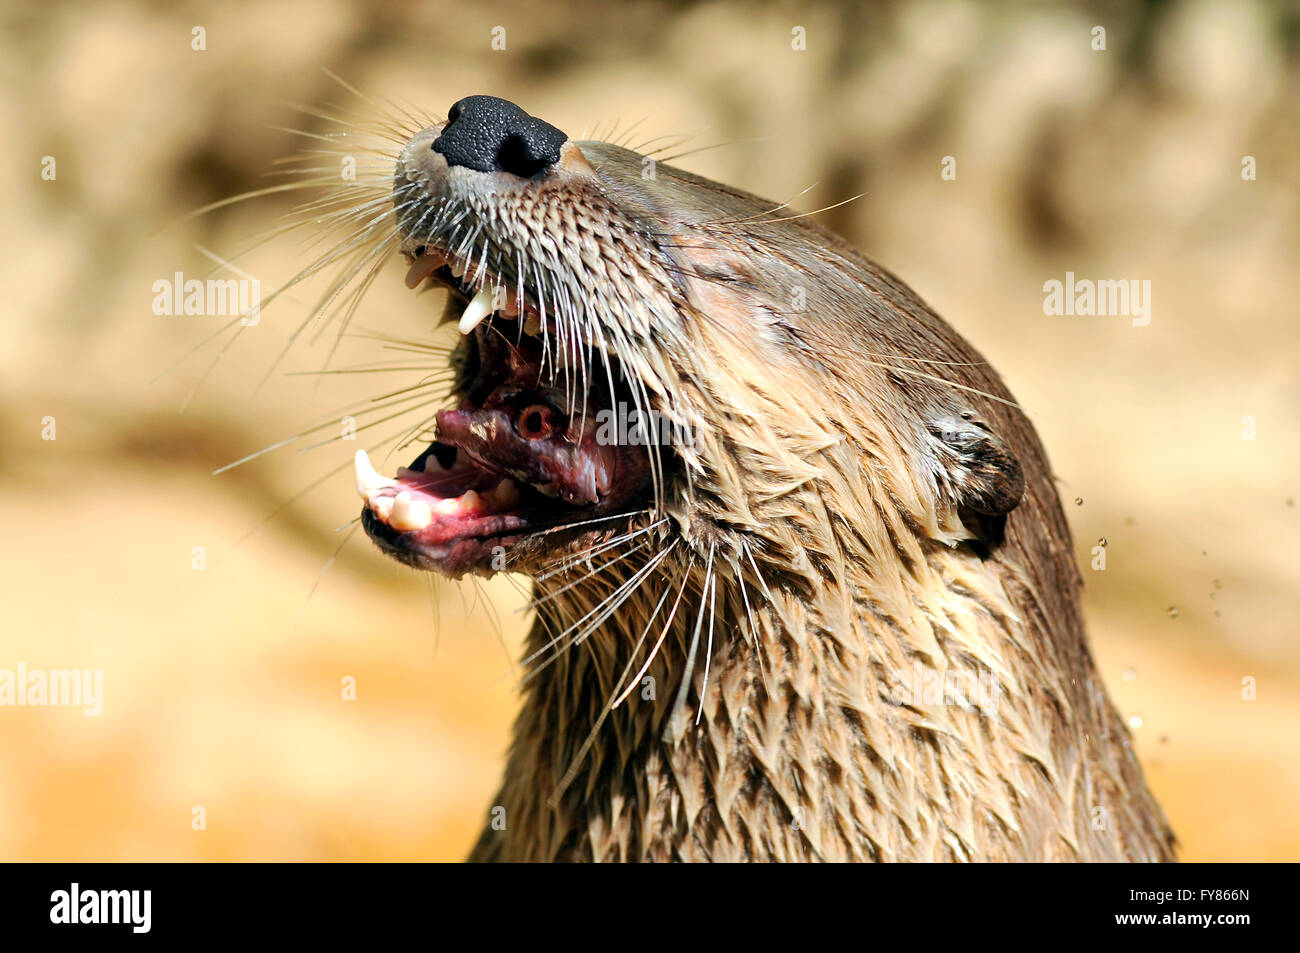 Portrait of  North American River Otter (Lontra canadensis) eating a fish Stock Photo